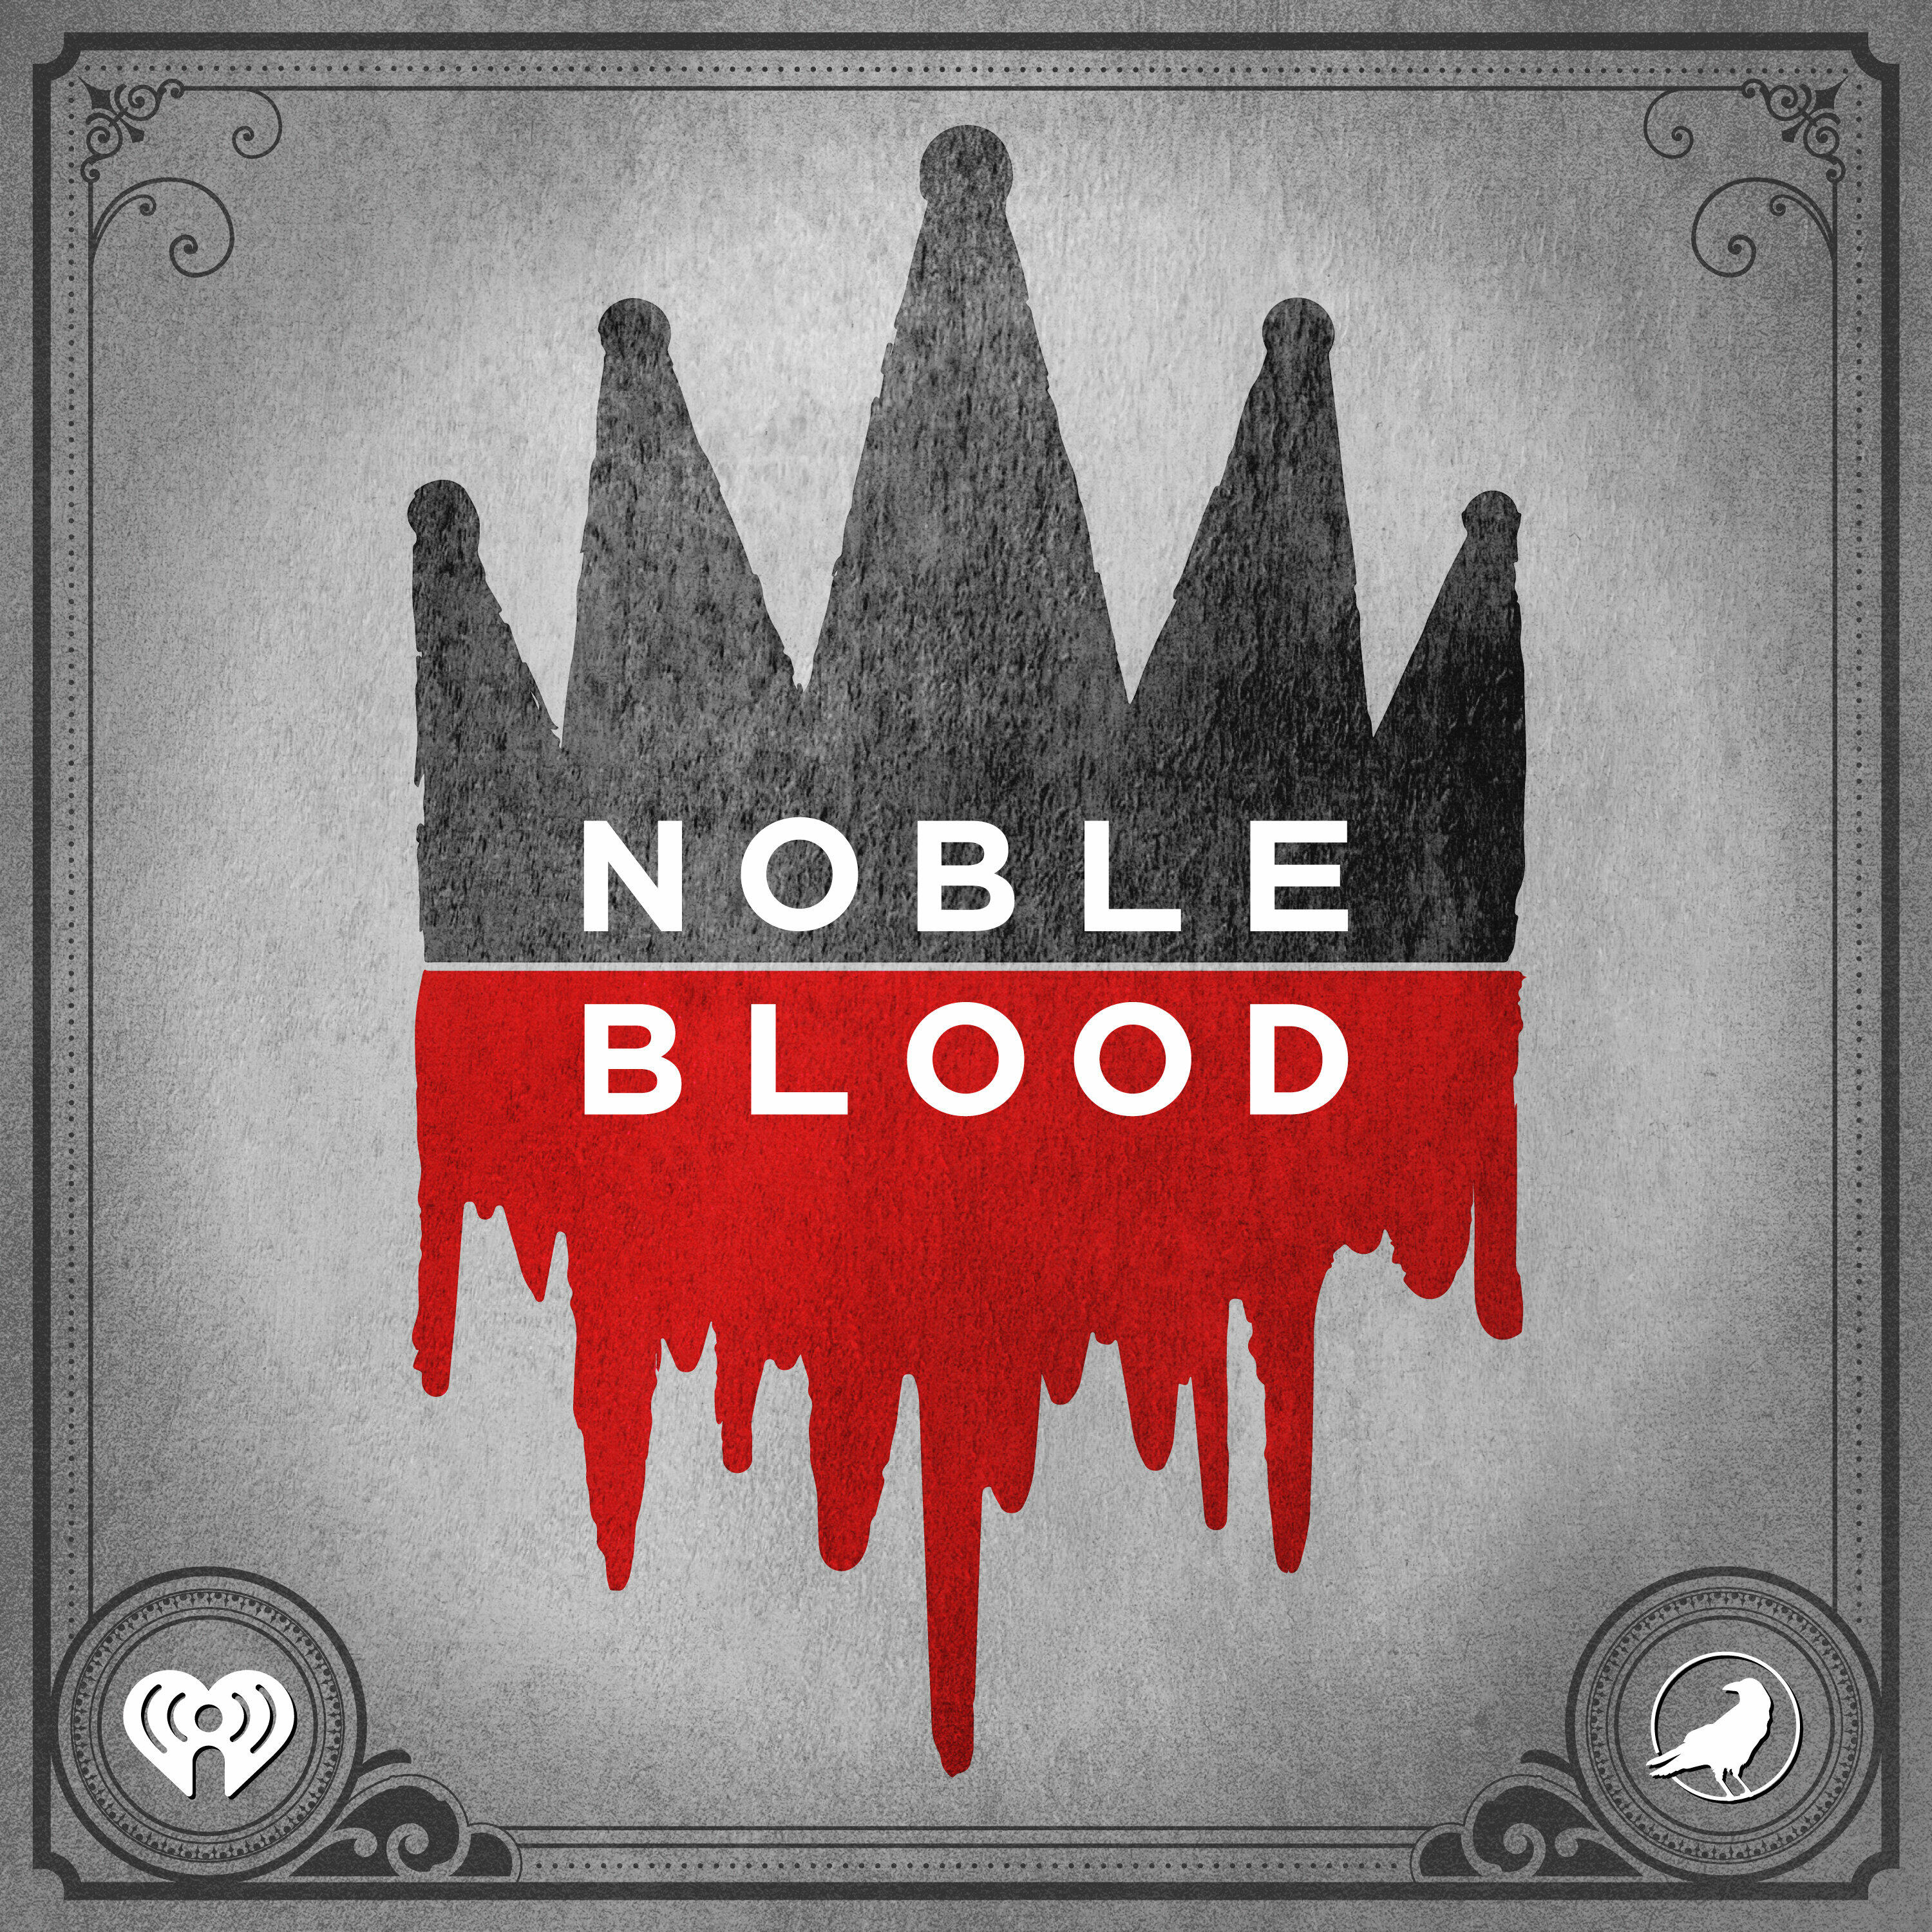 Listen Free to Noble Blood on iHeartRadio Podcasts | iHeartRadio